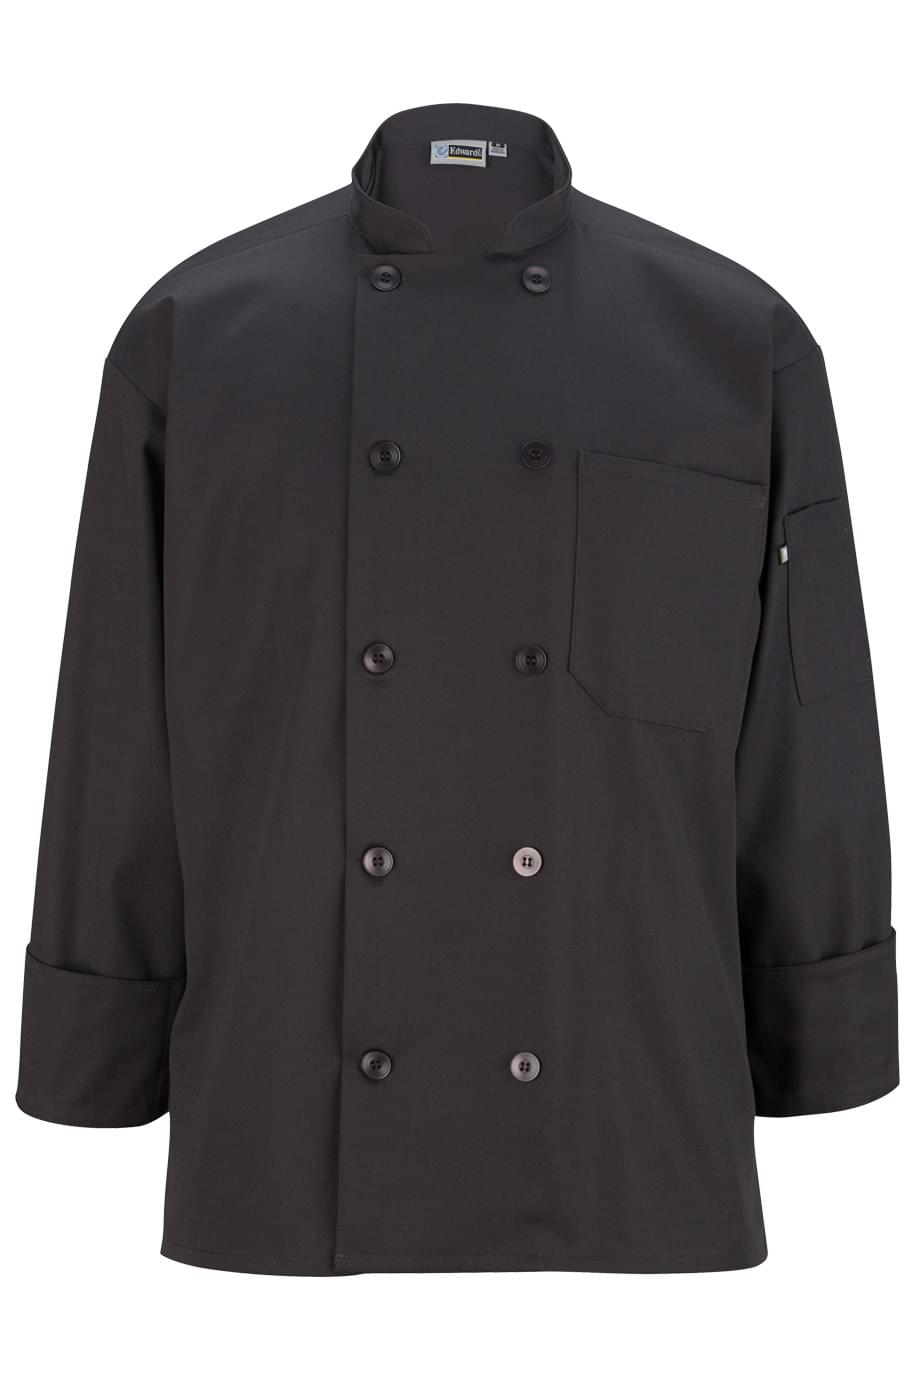 CLASSIC CHEF COAT - 10-BUTTONS | Edwards Garment